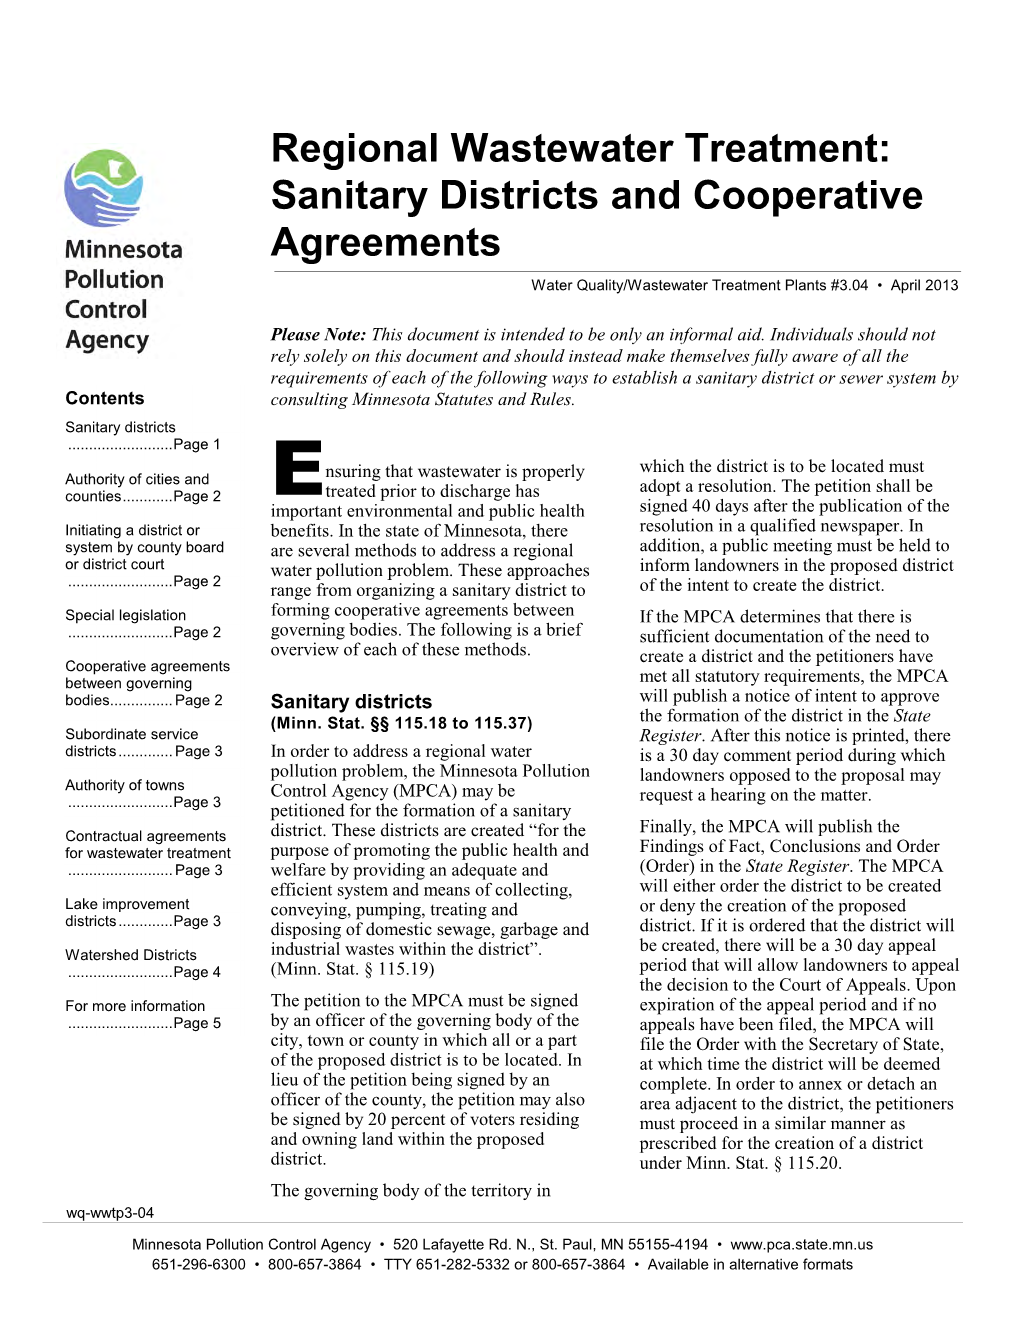 Regional Wastewater Treatment Sanitary Districts and Cooperative